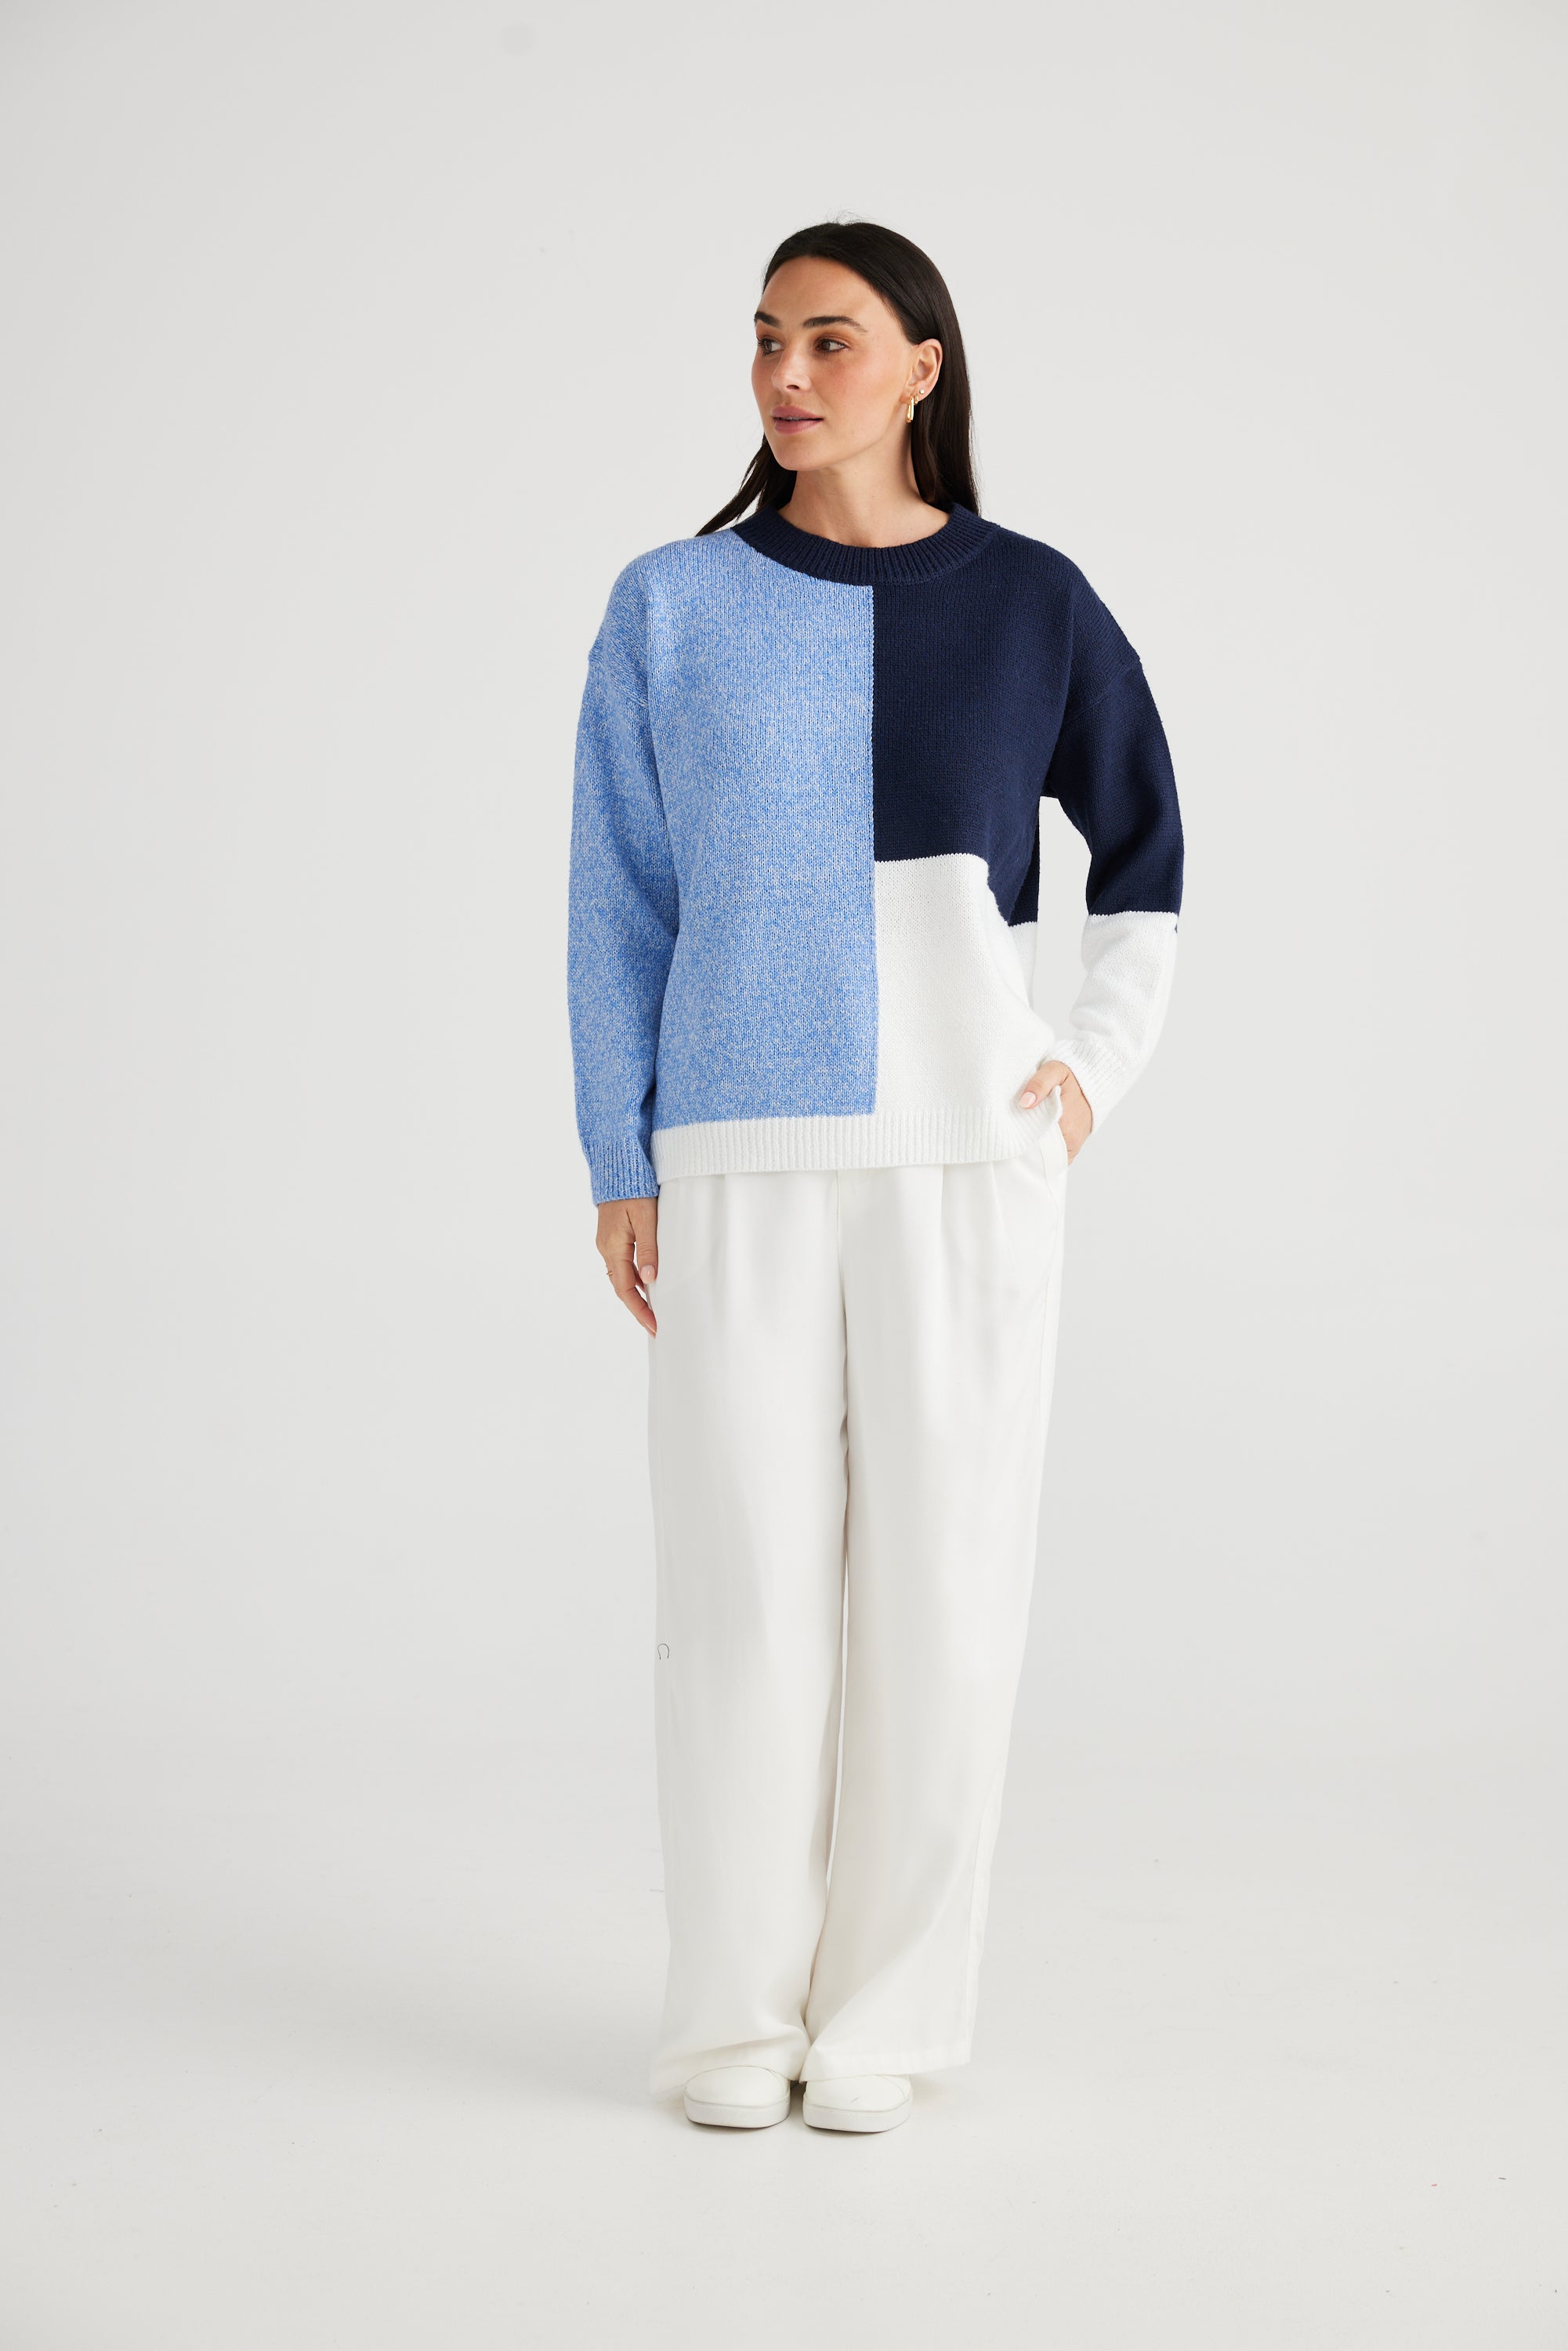 Brave and True Harmony Knit Blue